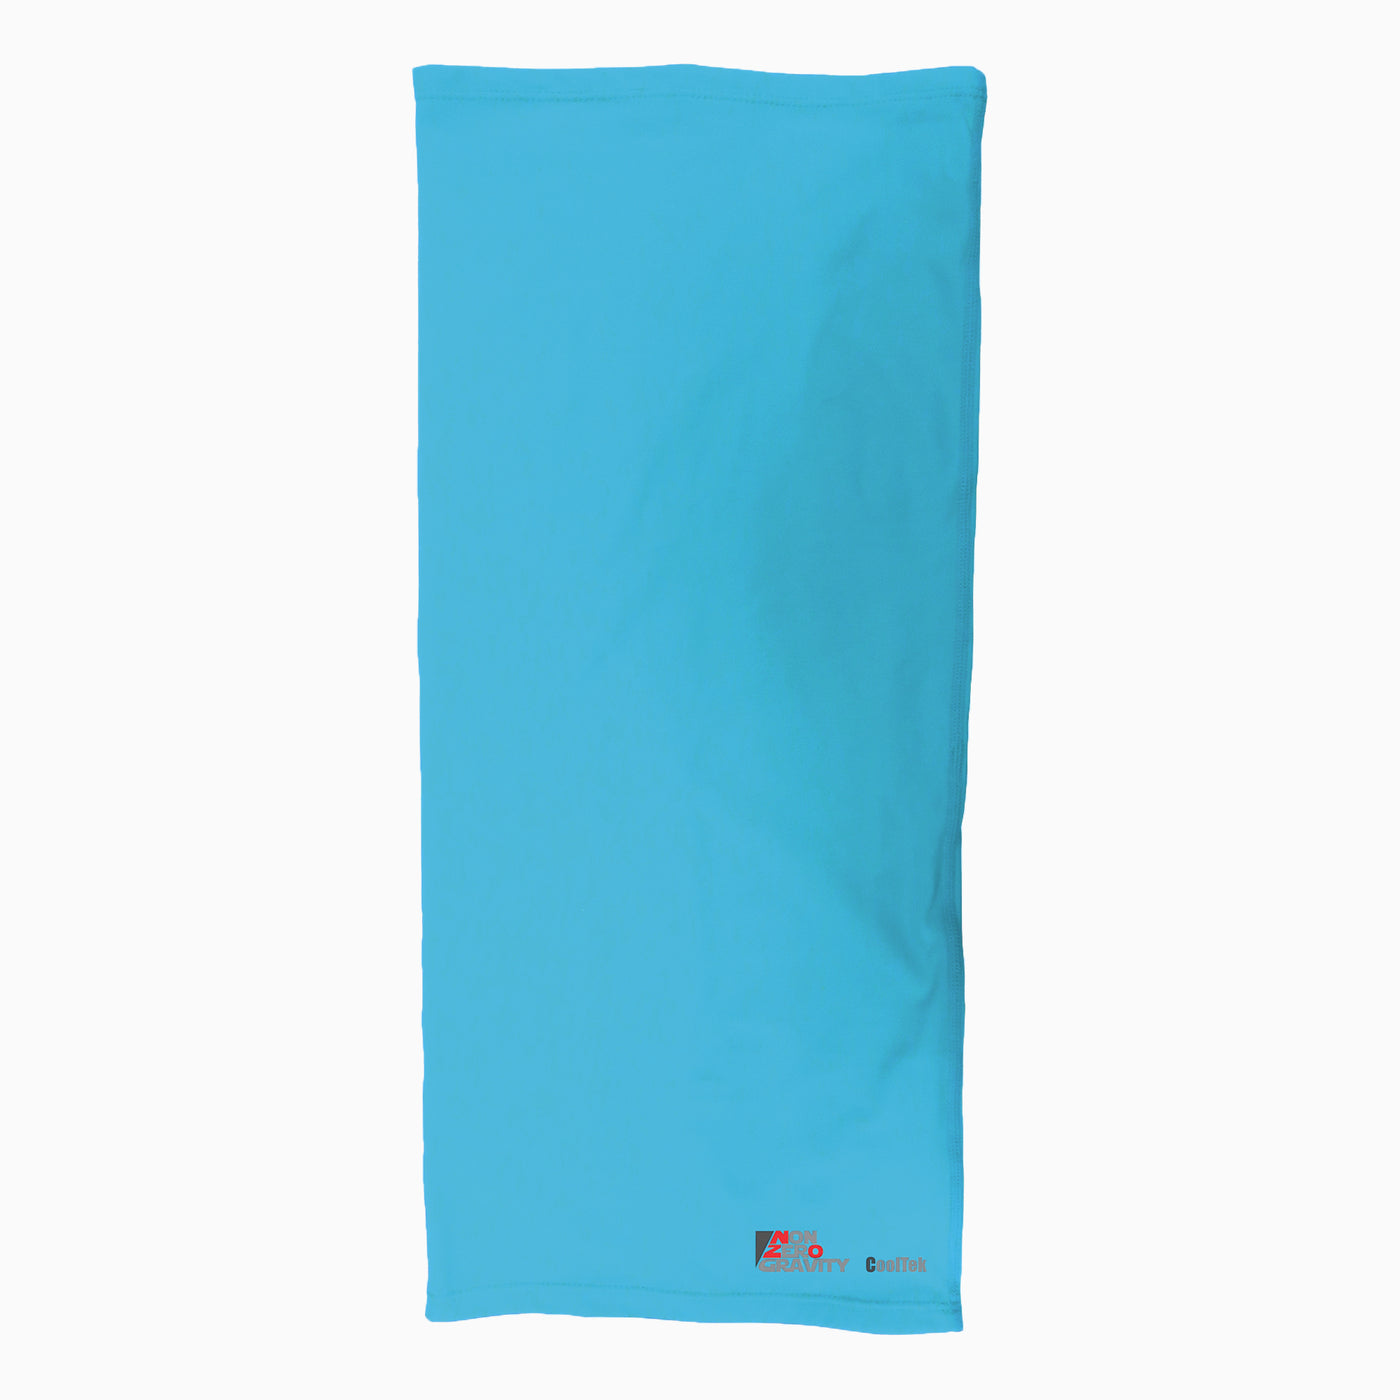 a light blue spandex neck gaiter to mask and protect your face